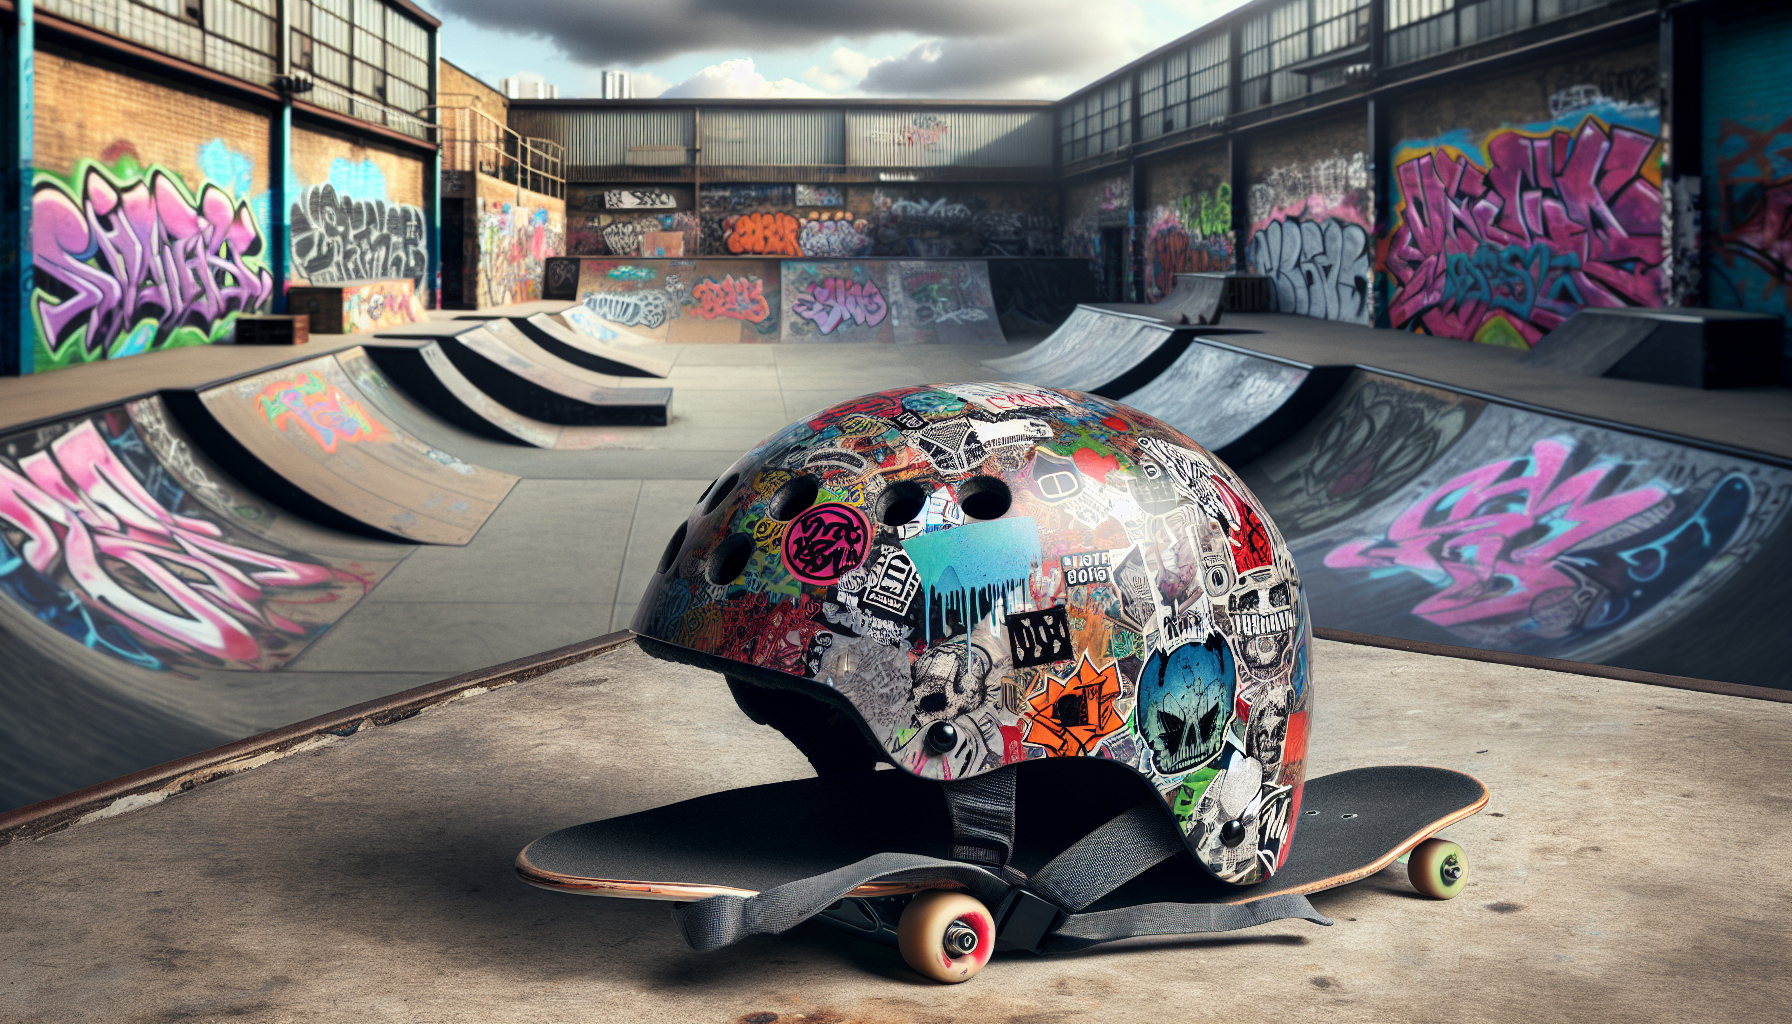 What Safety Measures Should Skateboarders Follow When Exploring DIY Skate Spots?